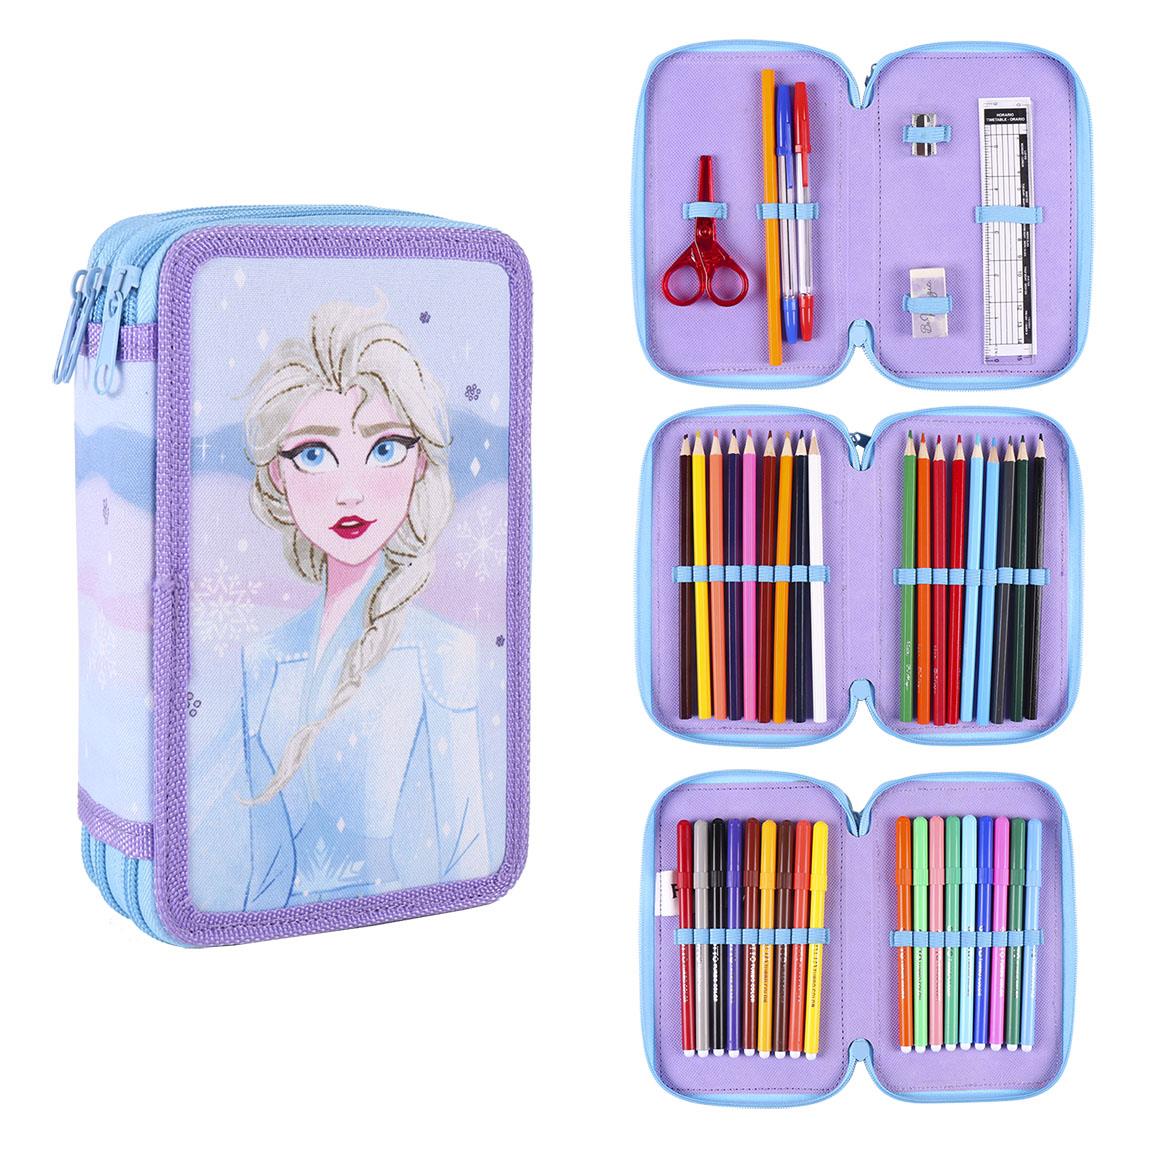 PENCIL CASE WITH ACCESSORIES FROZEN